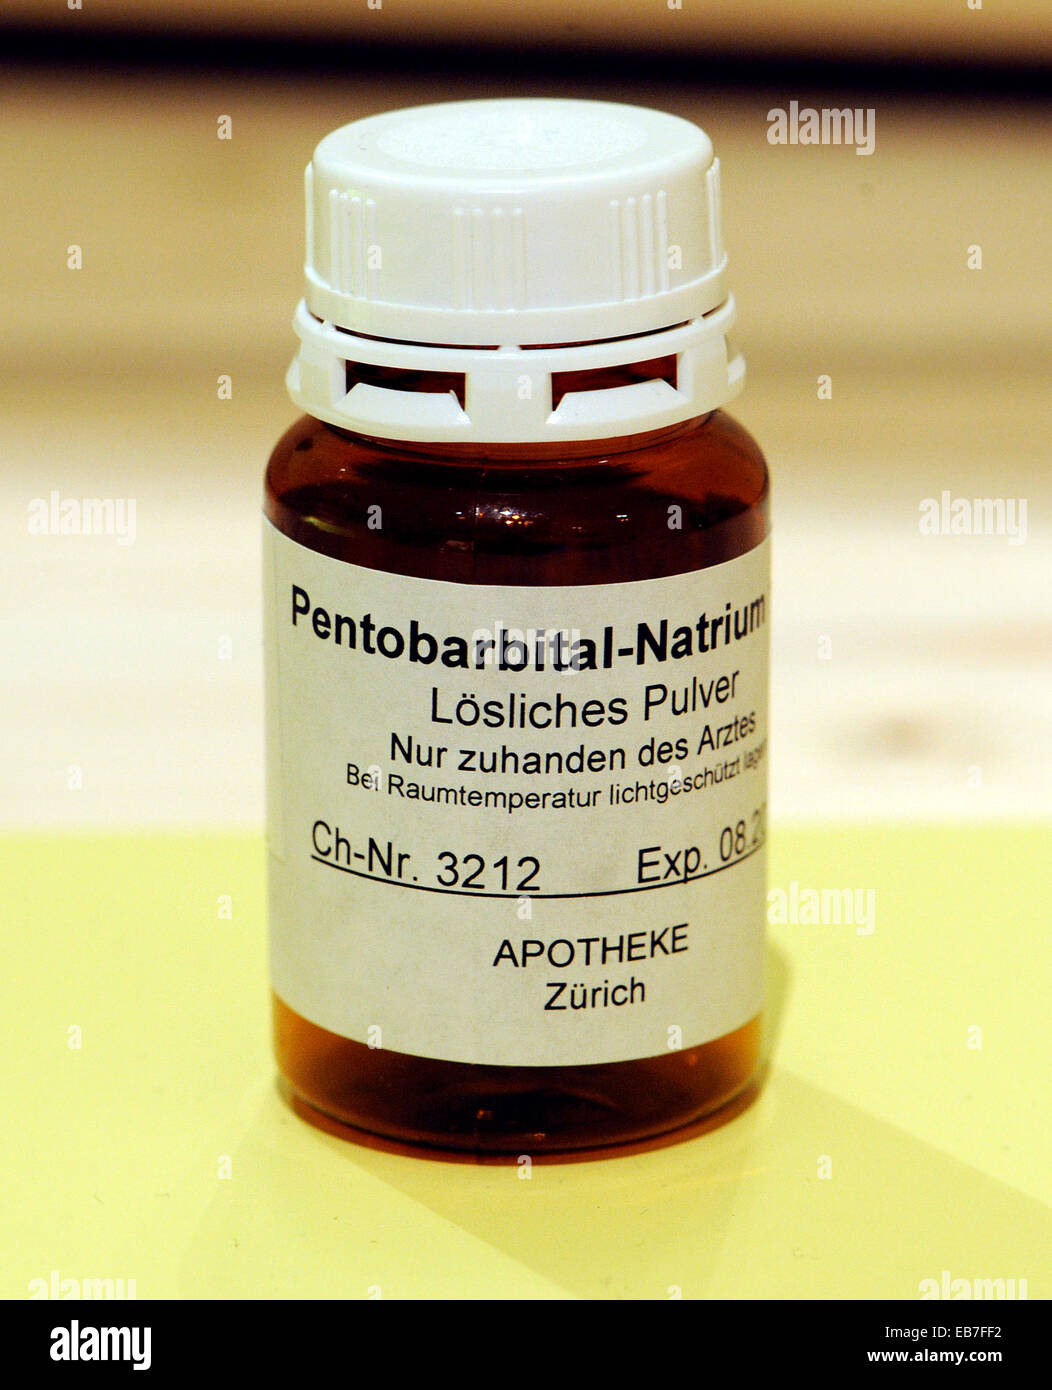 A bottle with Pentobarbital-Natrium, which is used in Switzerland for suicide, seen in Freiburg in the city-museum, April 26, 2012. Stock Photo